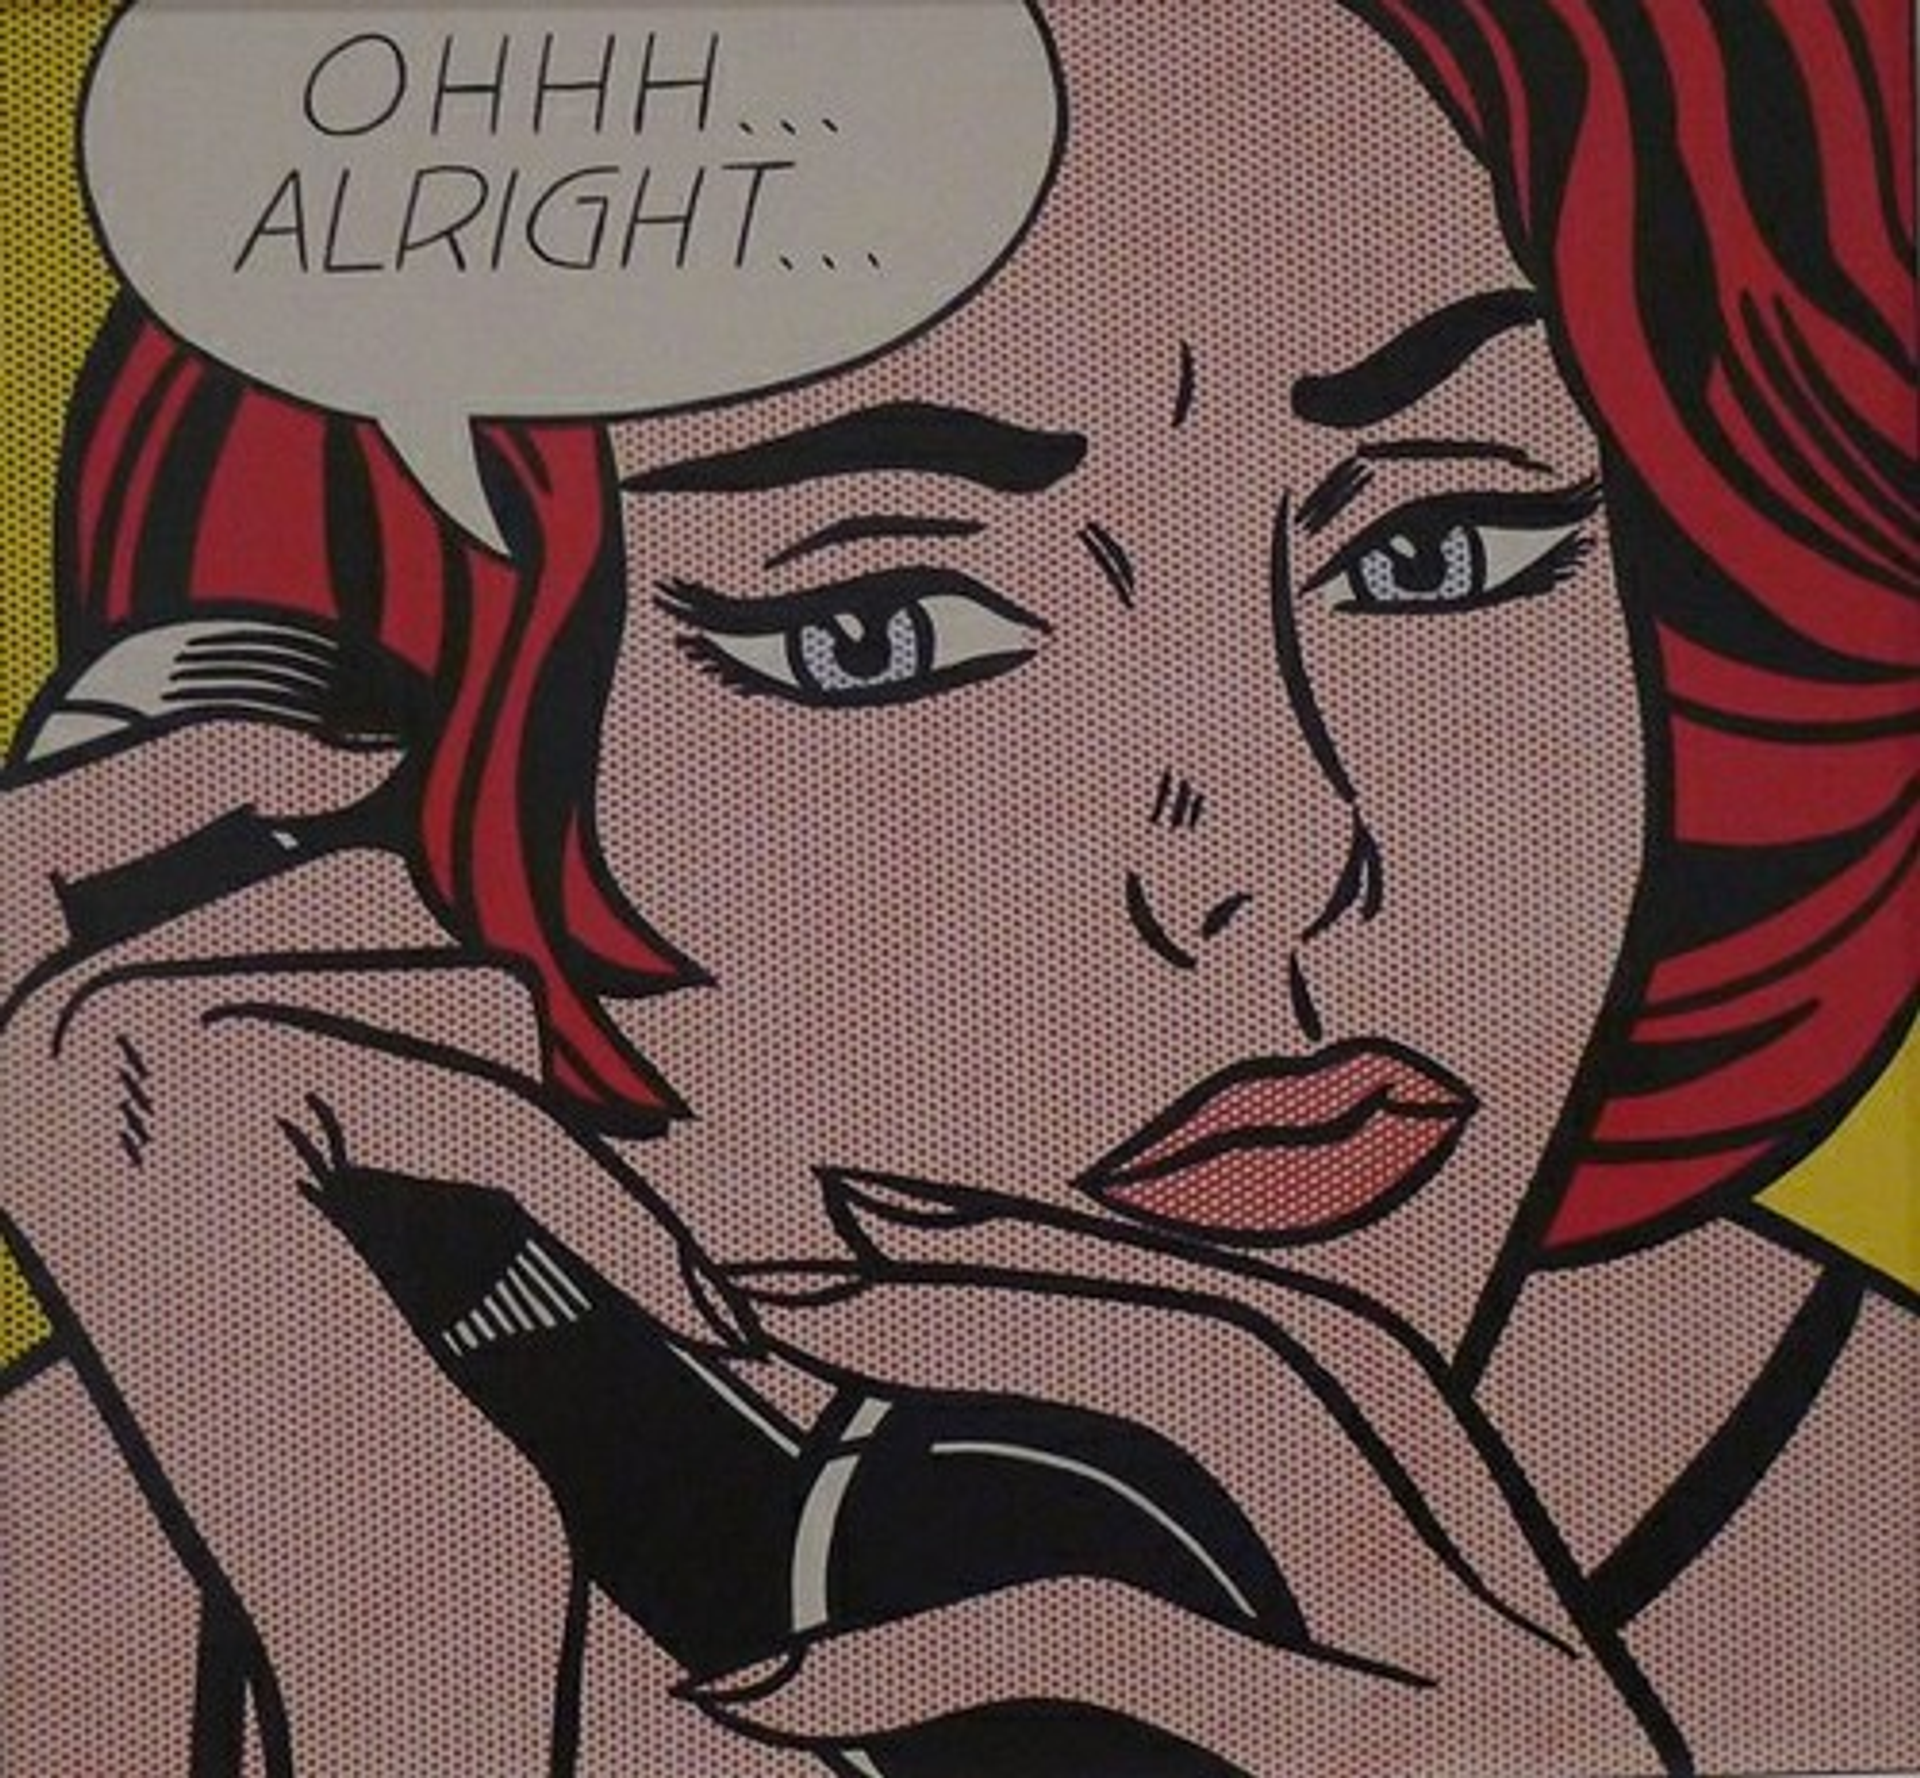 This painting shows a red-haired woman on the phone, as she says he speech bubble with the title.